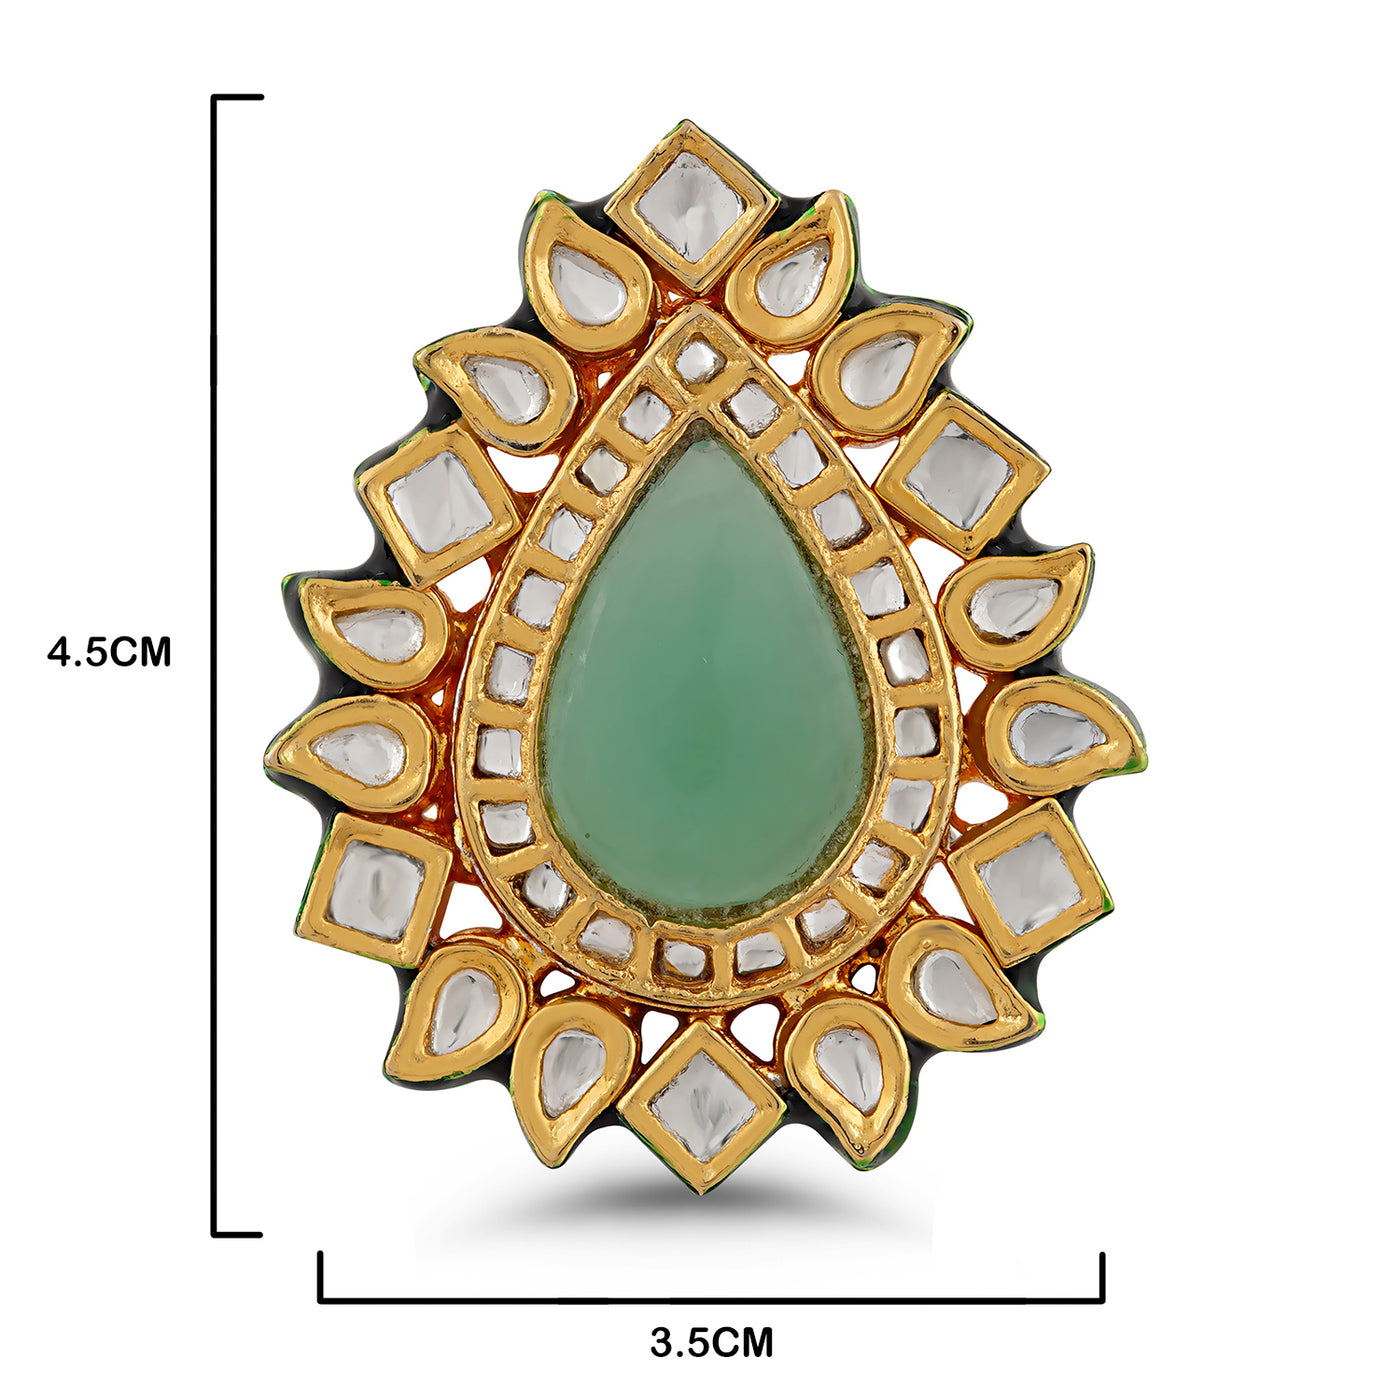 Green Centred Kundan Meenakari Ring with measurements in cm. 4.5cm by 3.5cm.